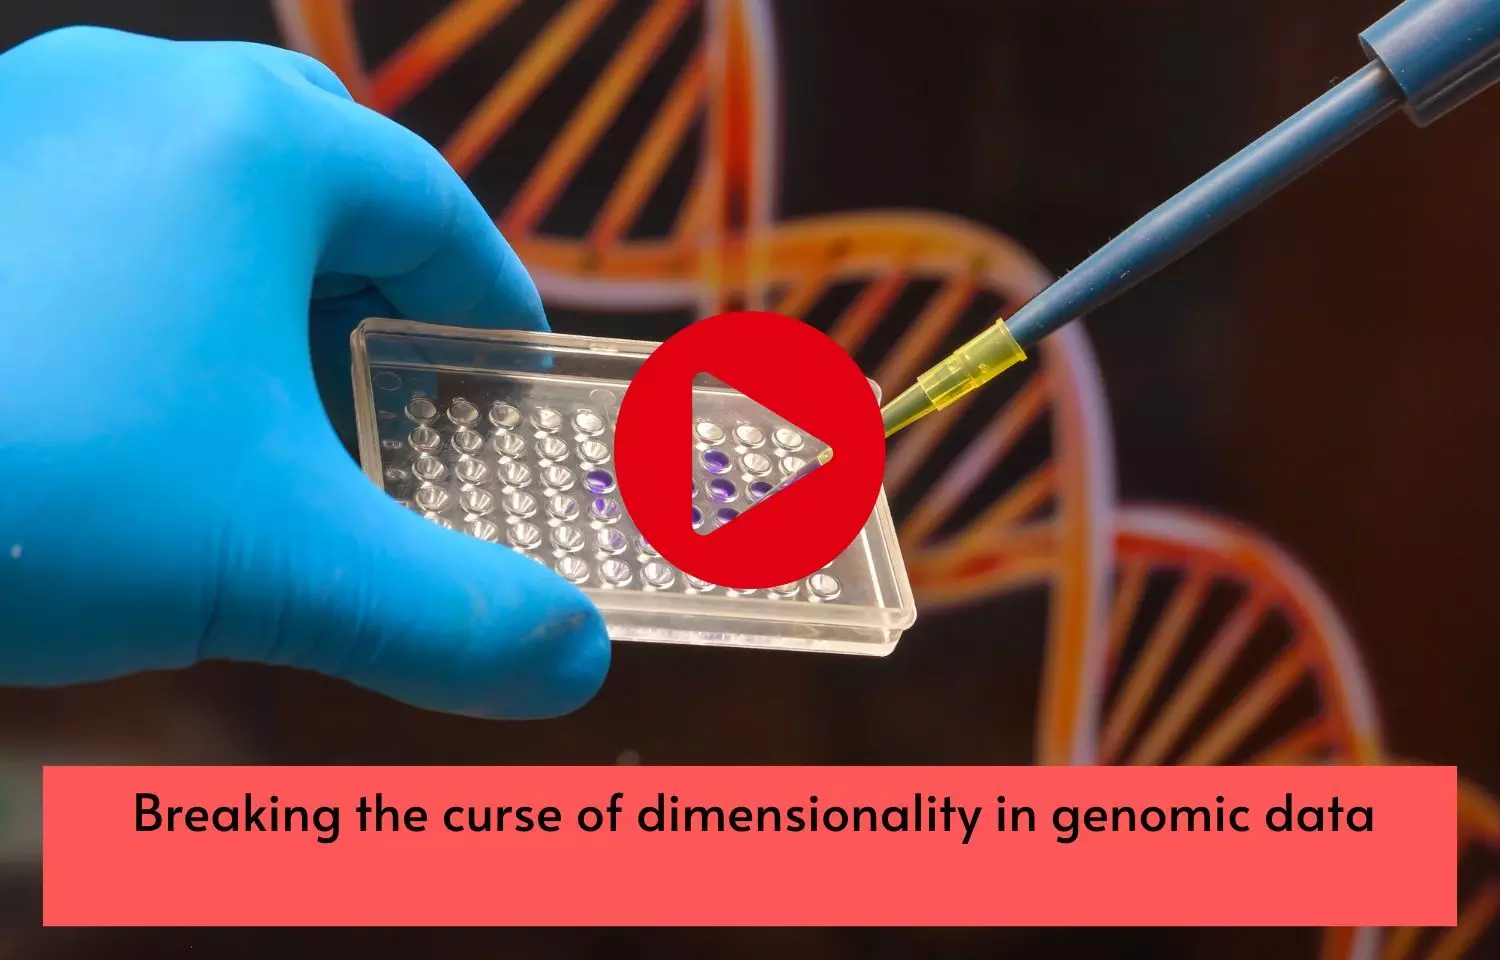 Breaking the curse of dimensionality in genomic data